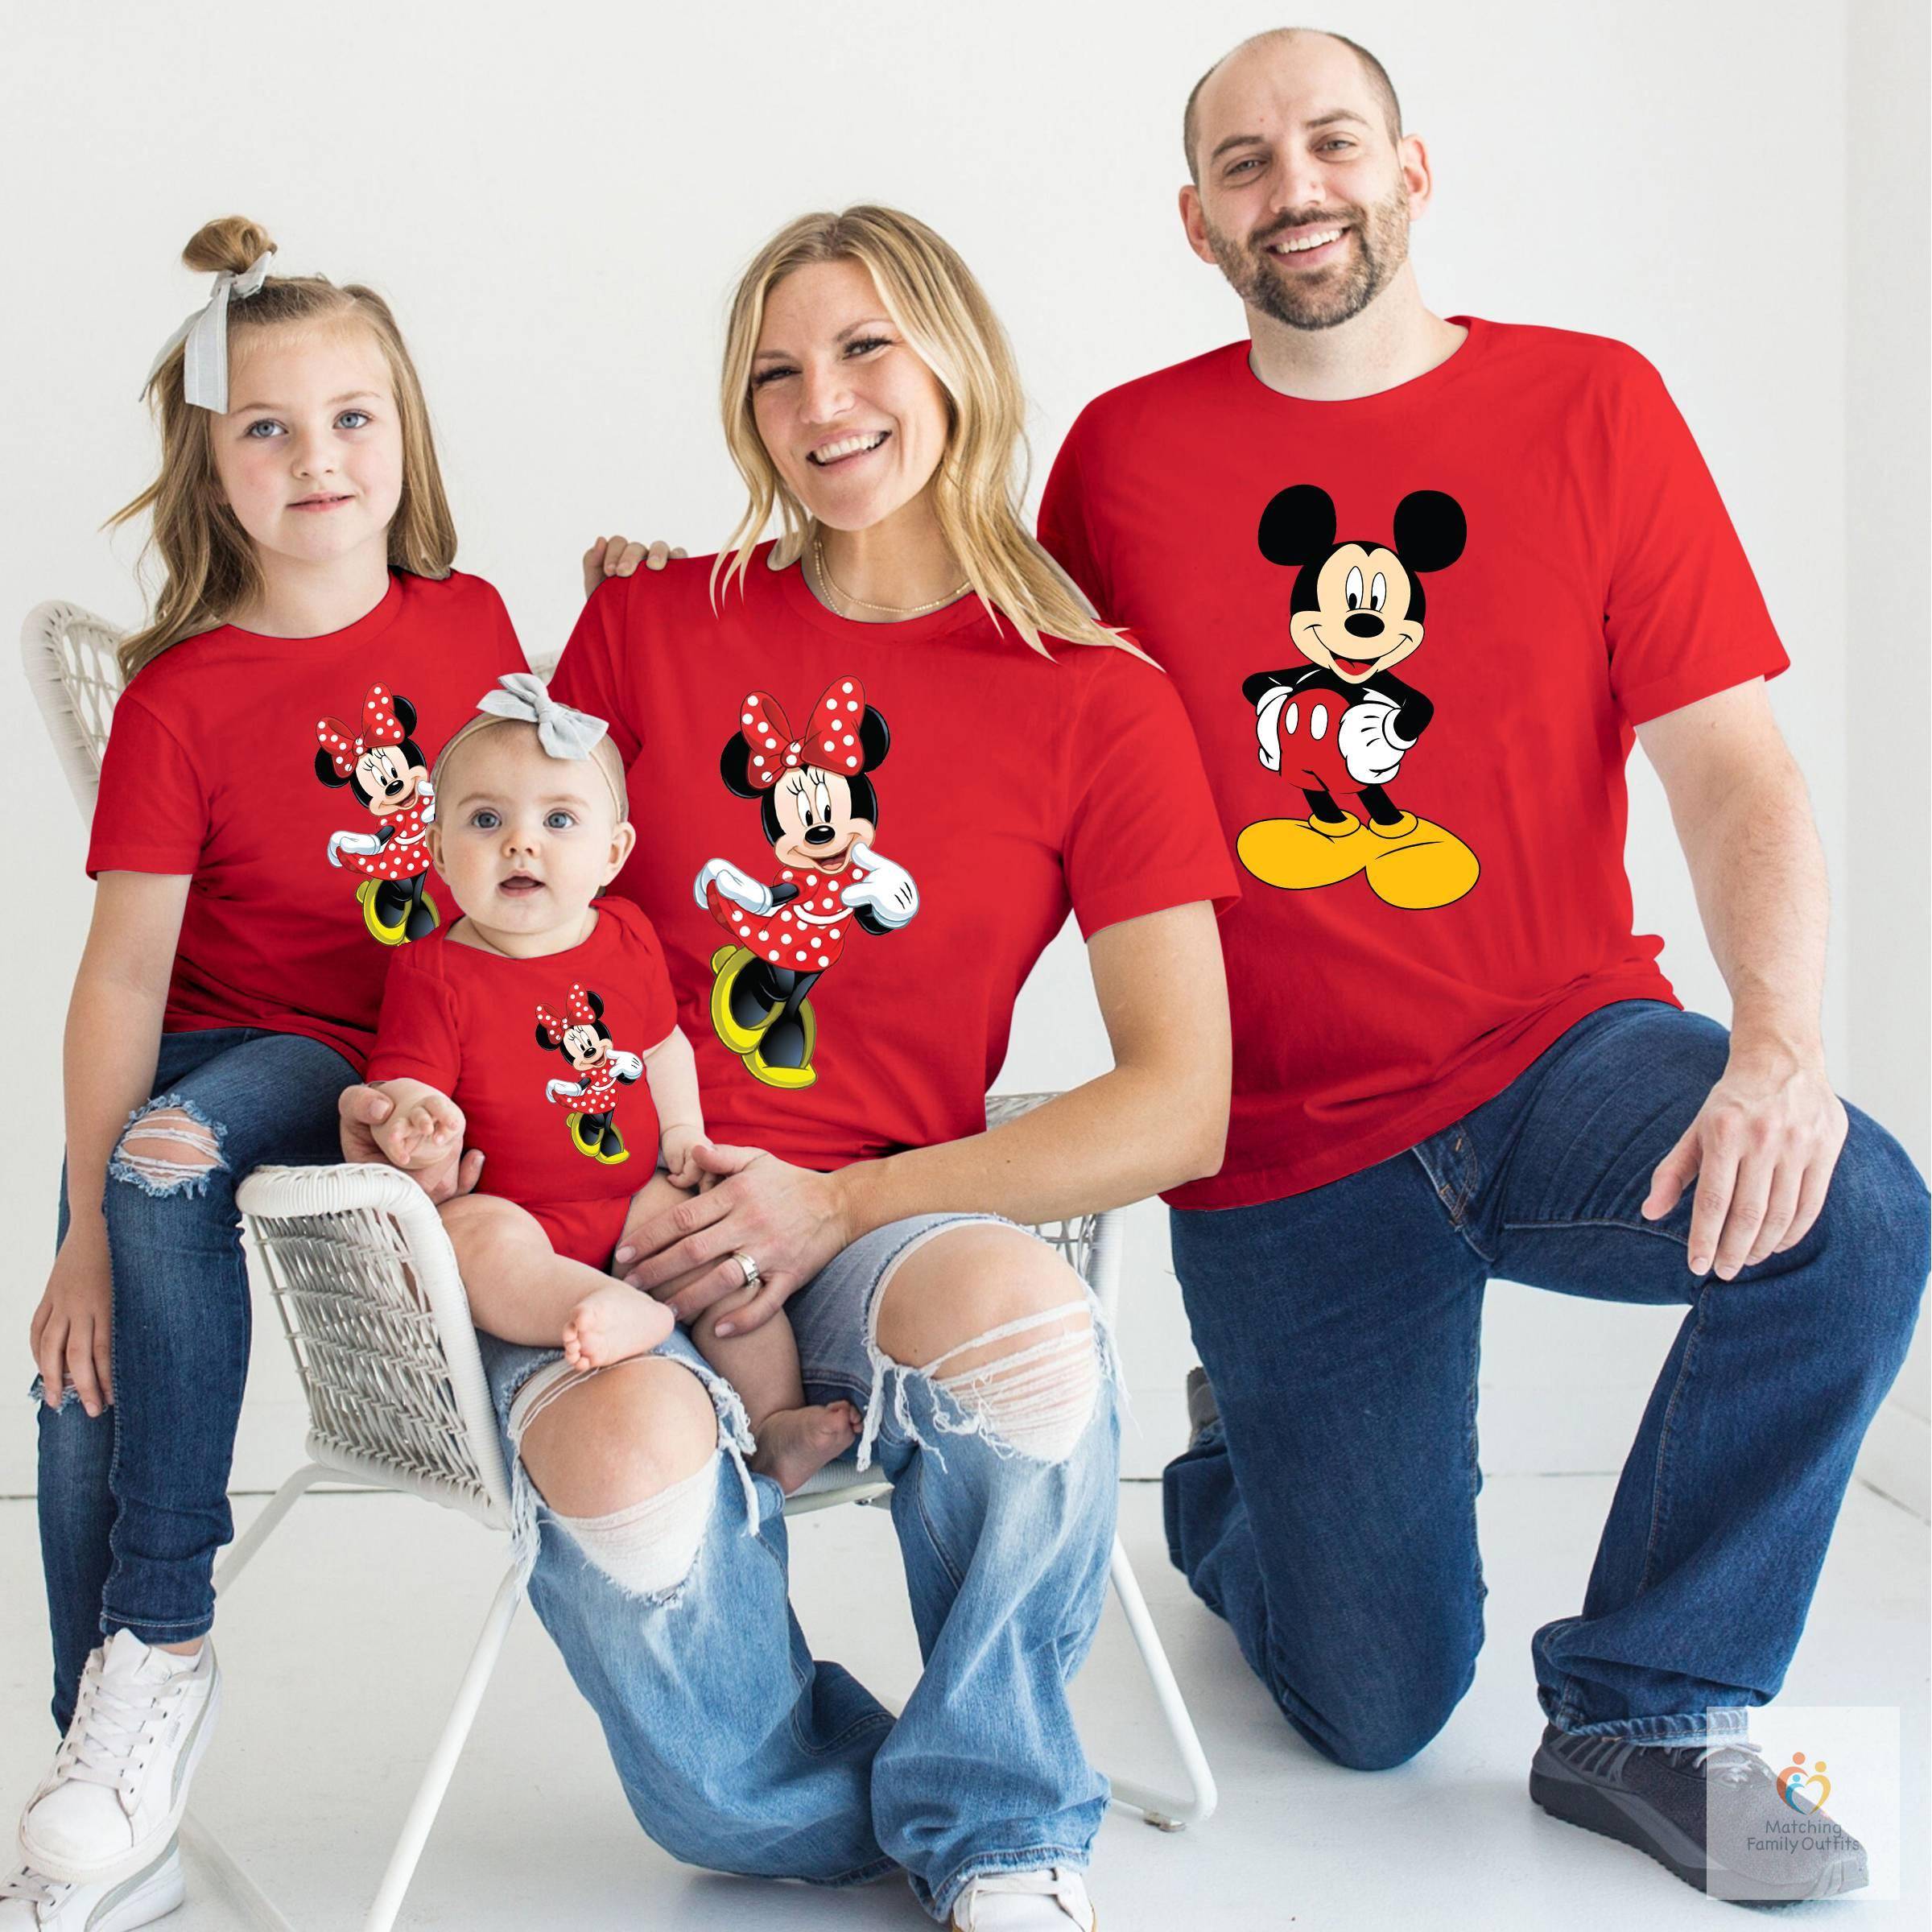 Mickey Mouse and Minnie Mouse T shirts for Family Birthday Party T shirts Matching Family Outfits cb5feb1b7314637725a2e7